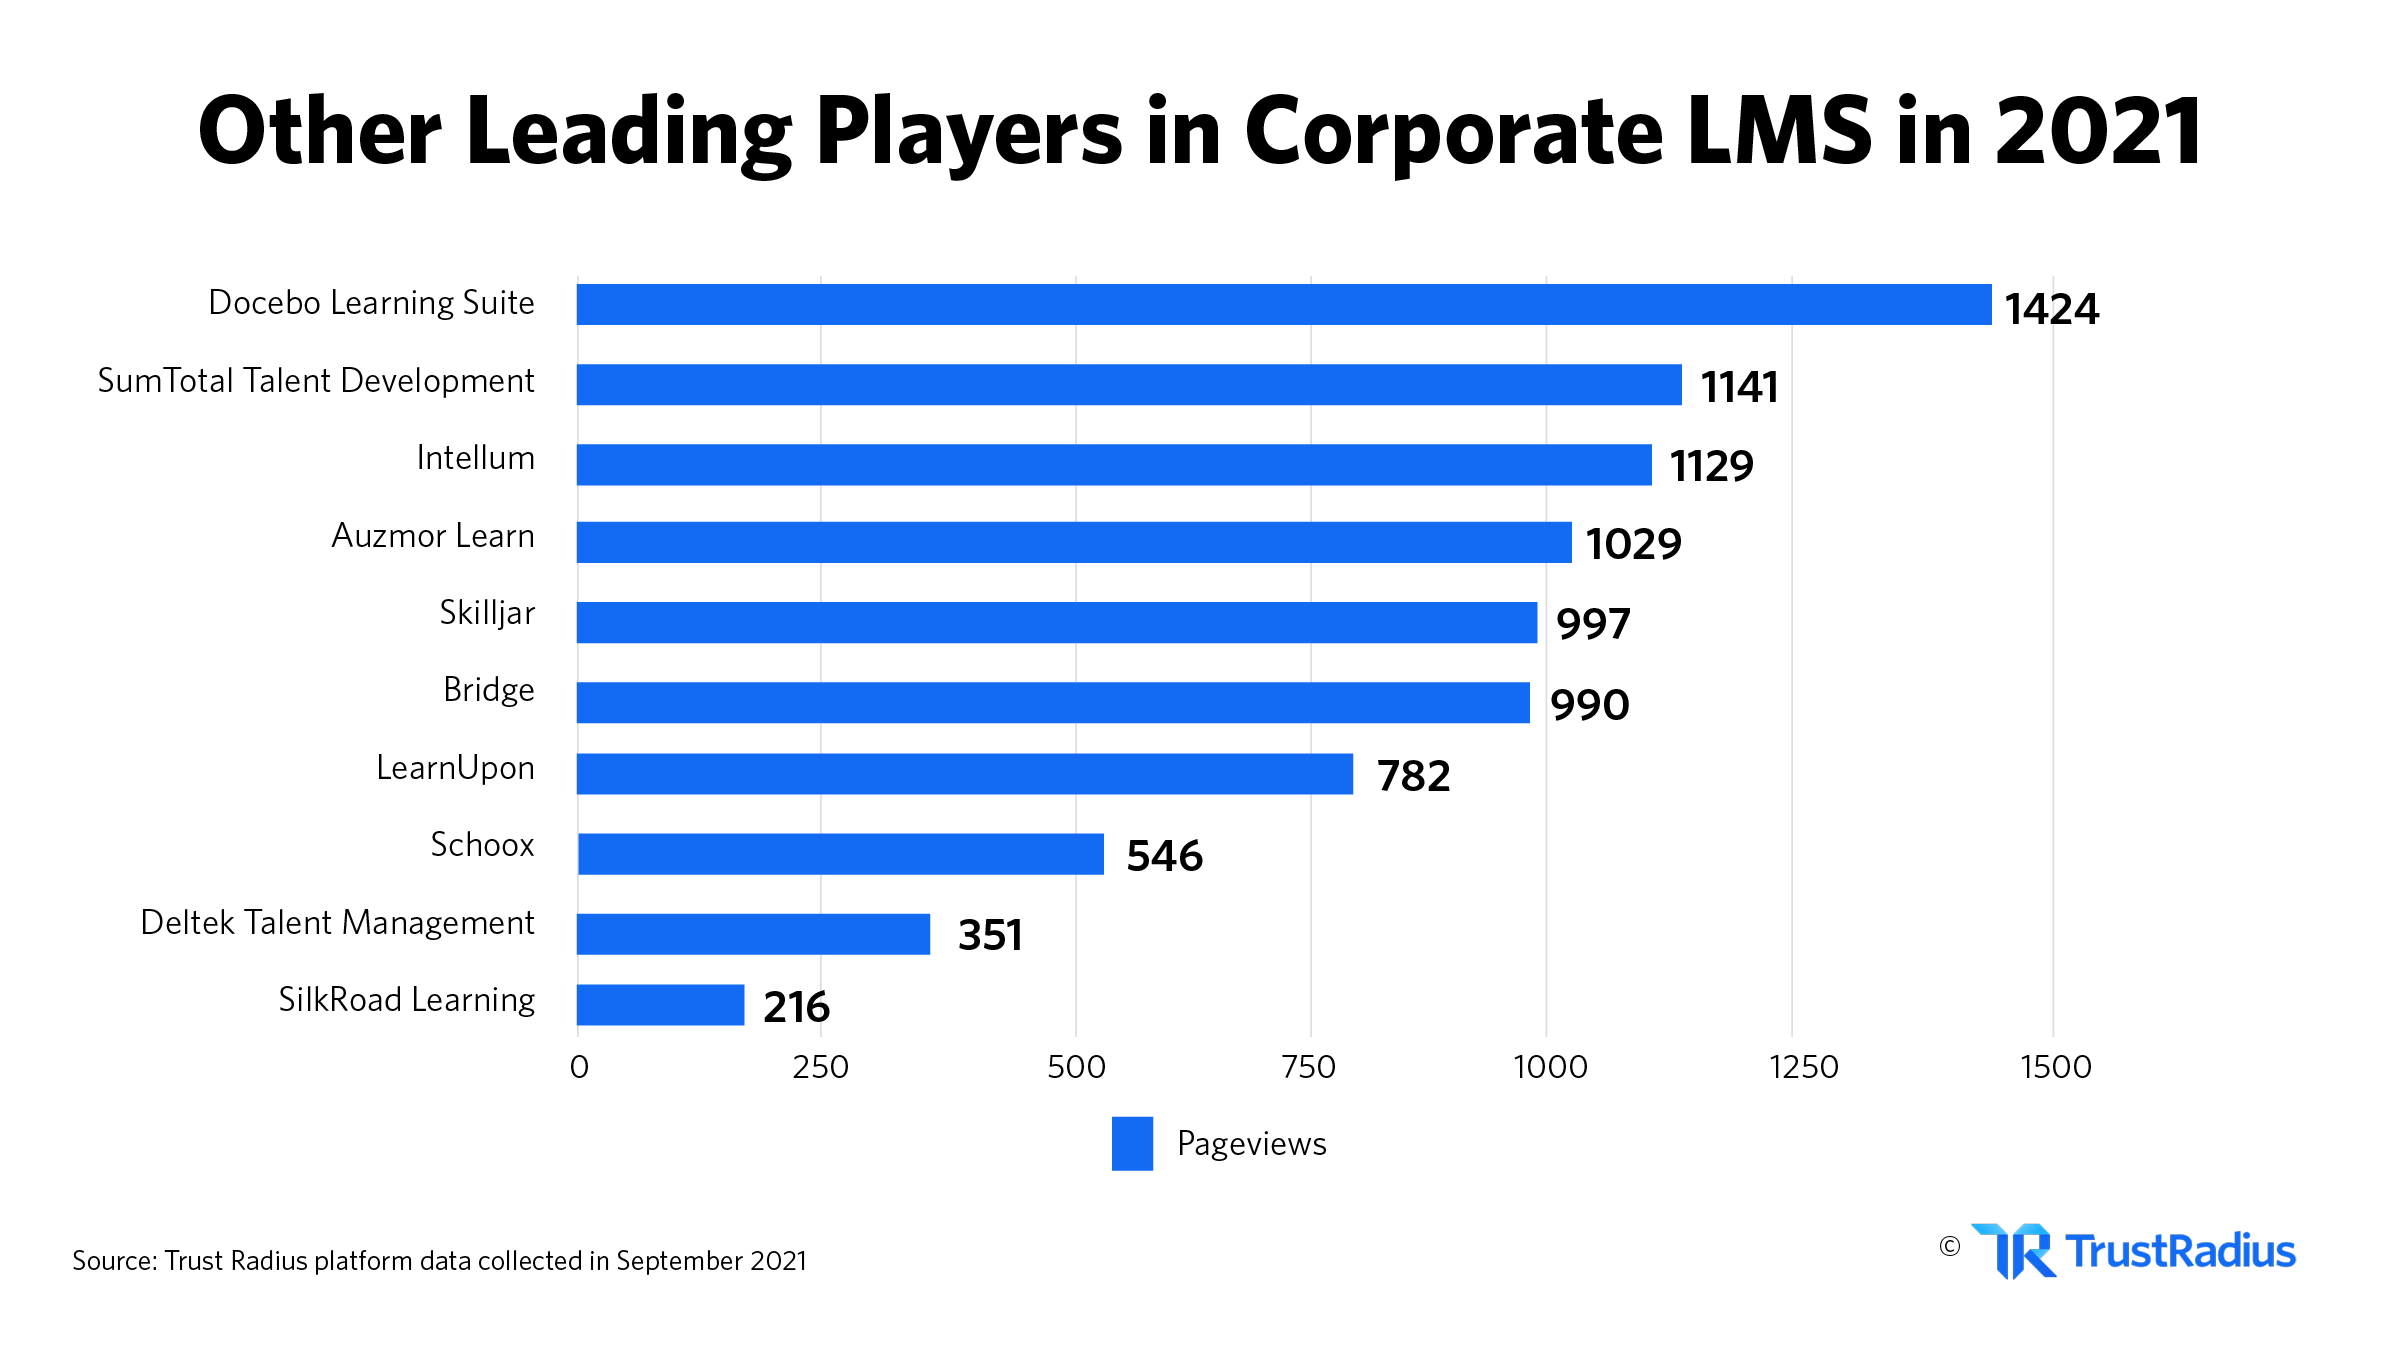 Other leading players is the corporate lms market